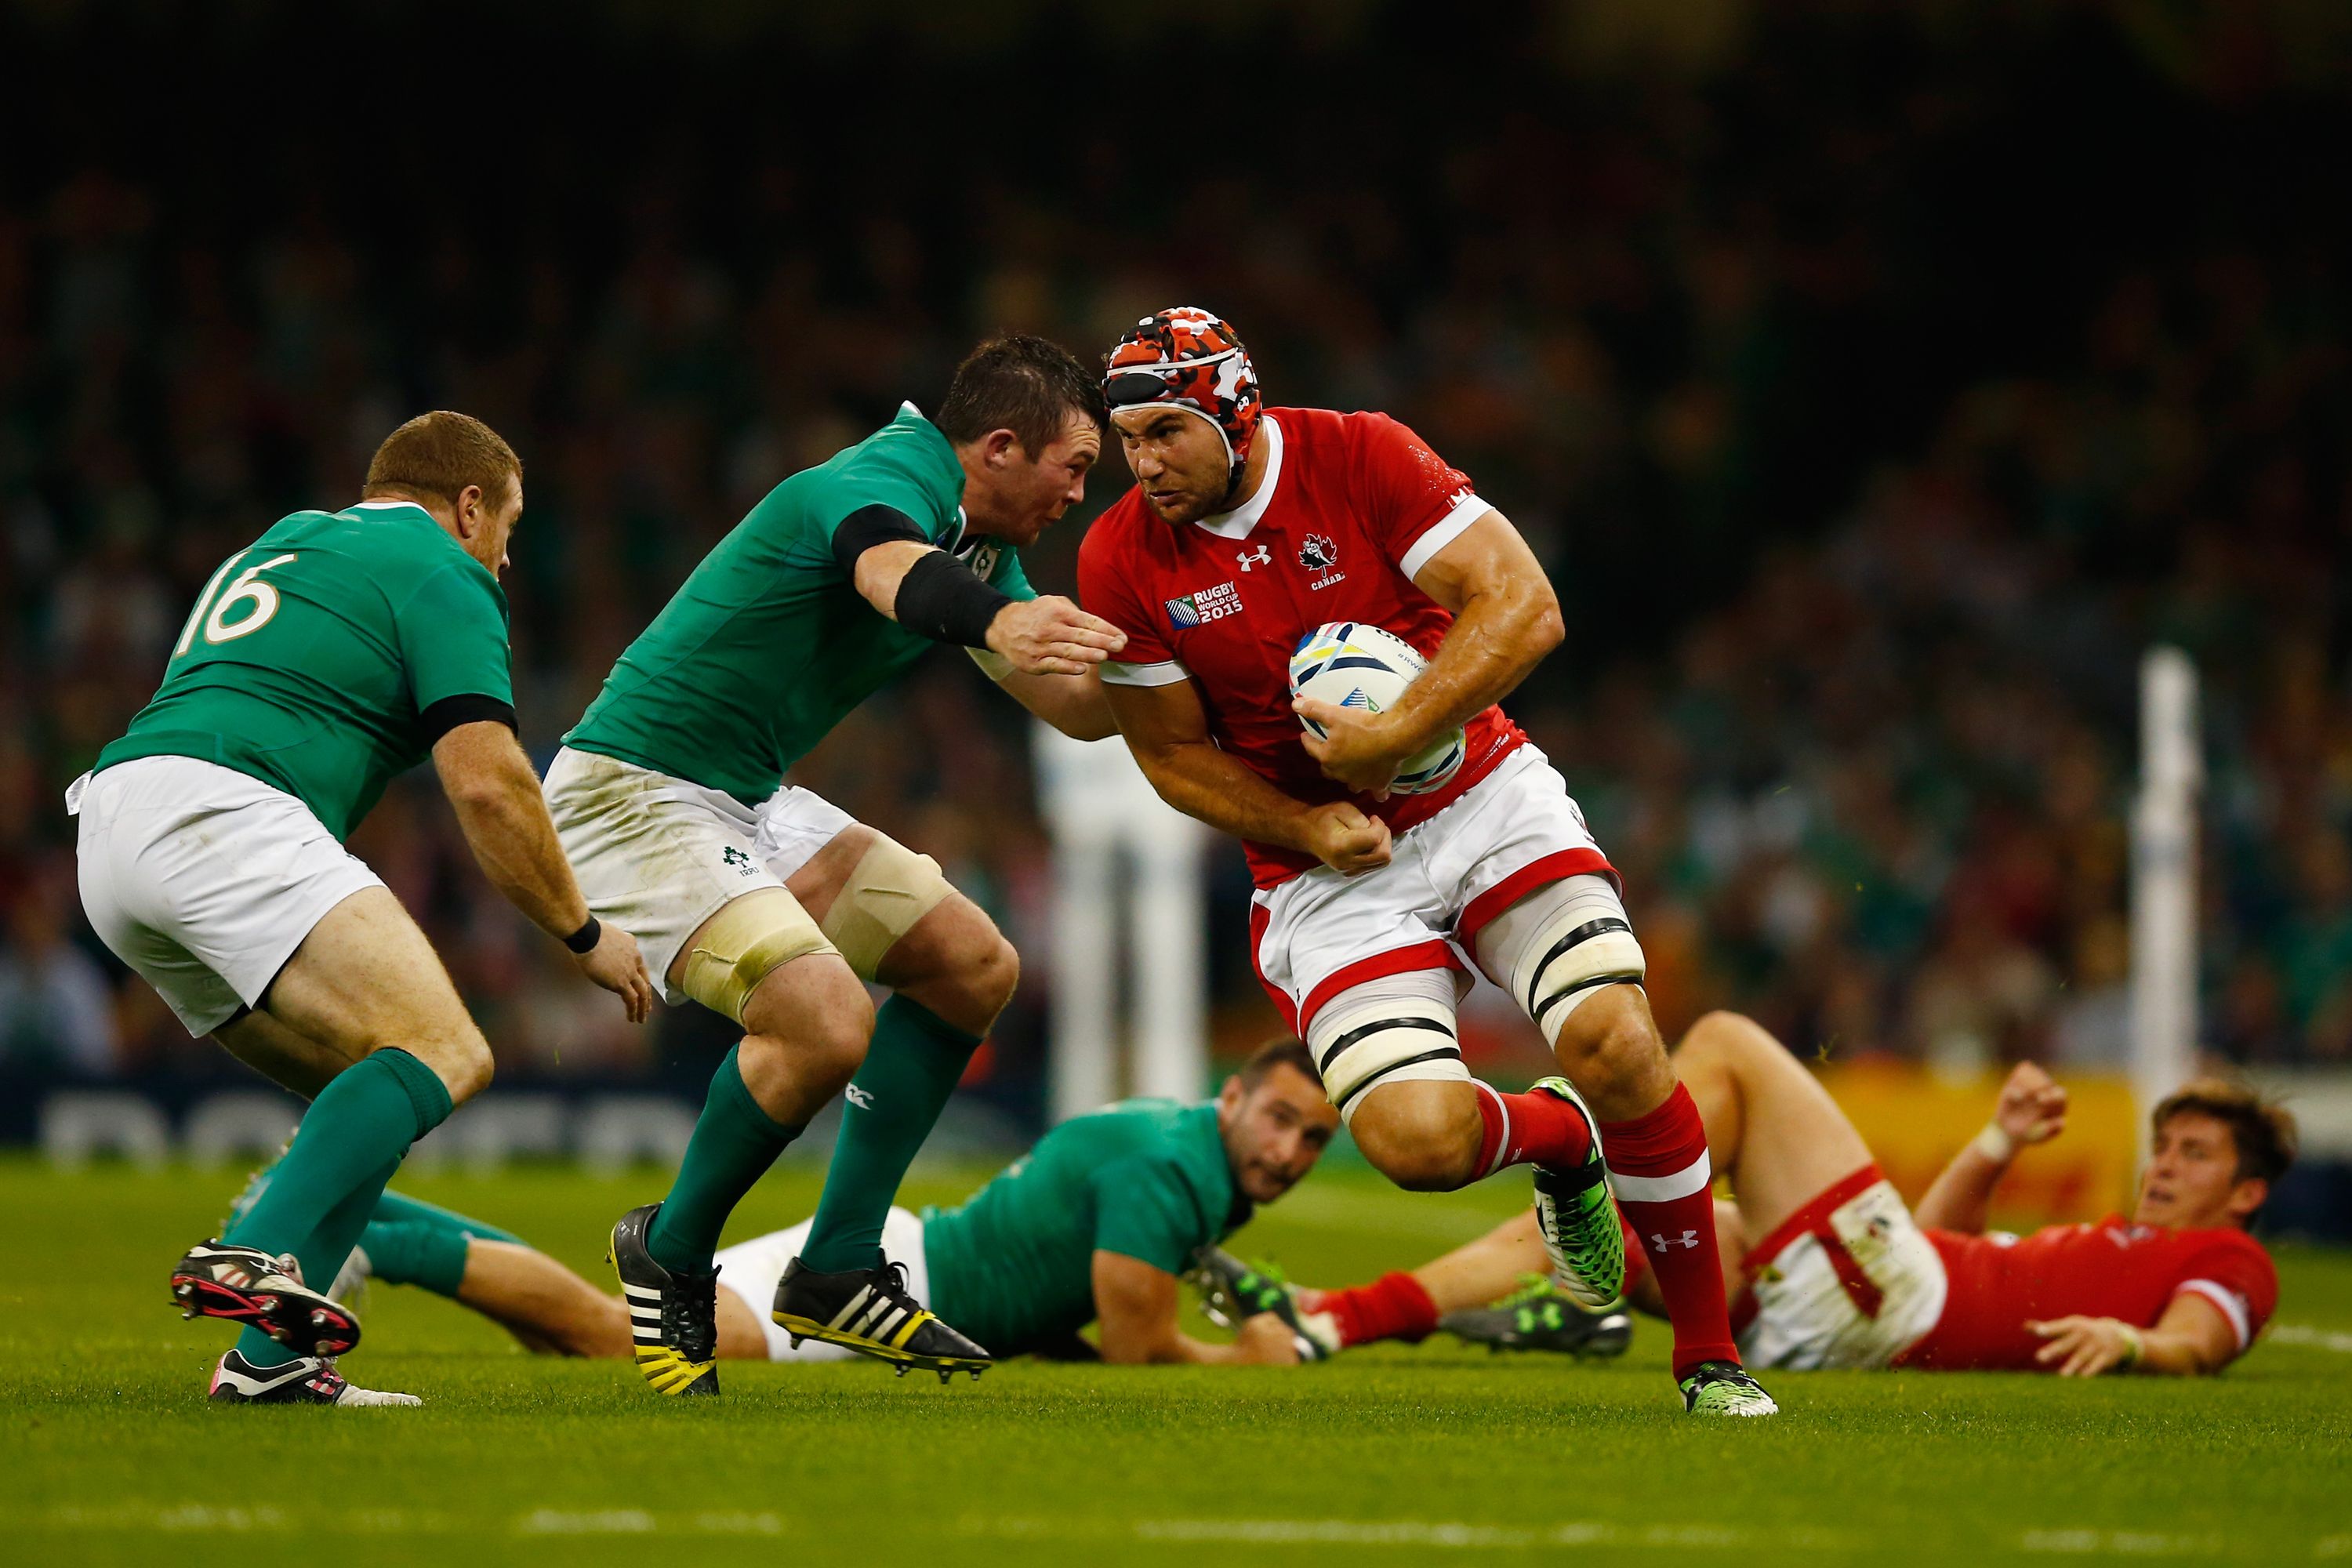 CARDIFF, WALES - SEPTEMBER 19:  Jebb Sinclair of Canada takes on the Ireland defence during the 2015 Rugby World Cup Pool D match between Ireland and Canada at the Millennium Stadium on September 19, 2015 in Cardiff, United Kingdom.  (Photo by Laurence Griffiths/Getty Images)